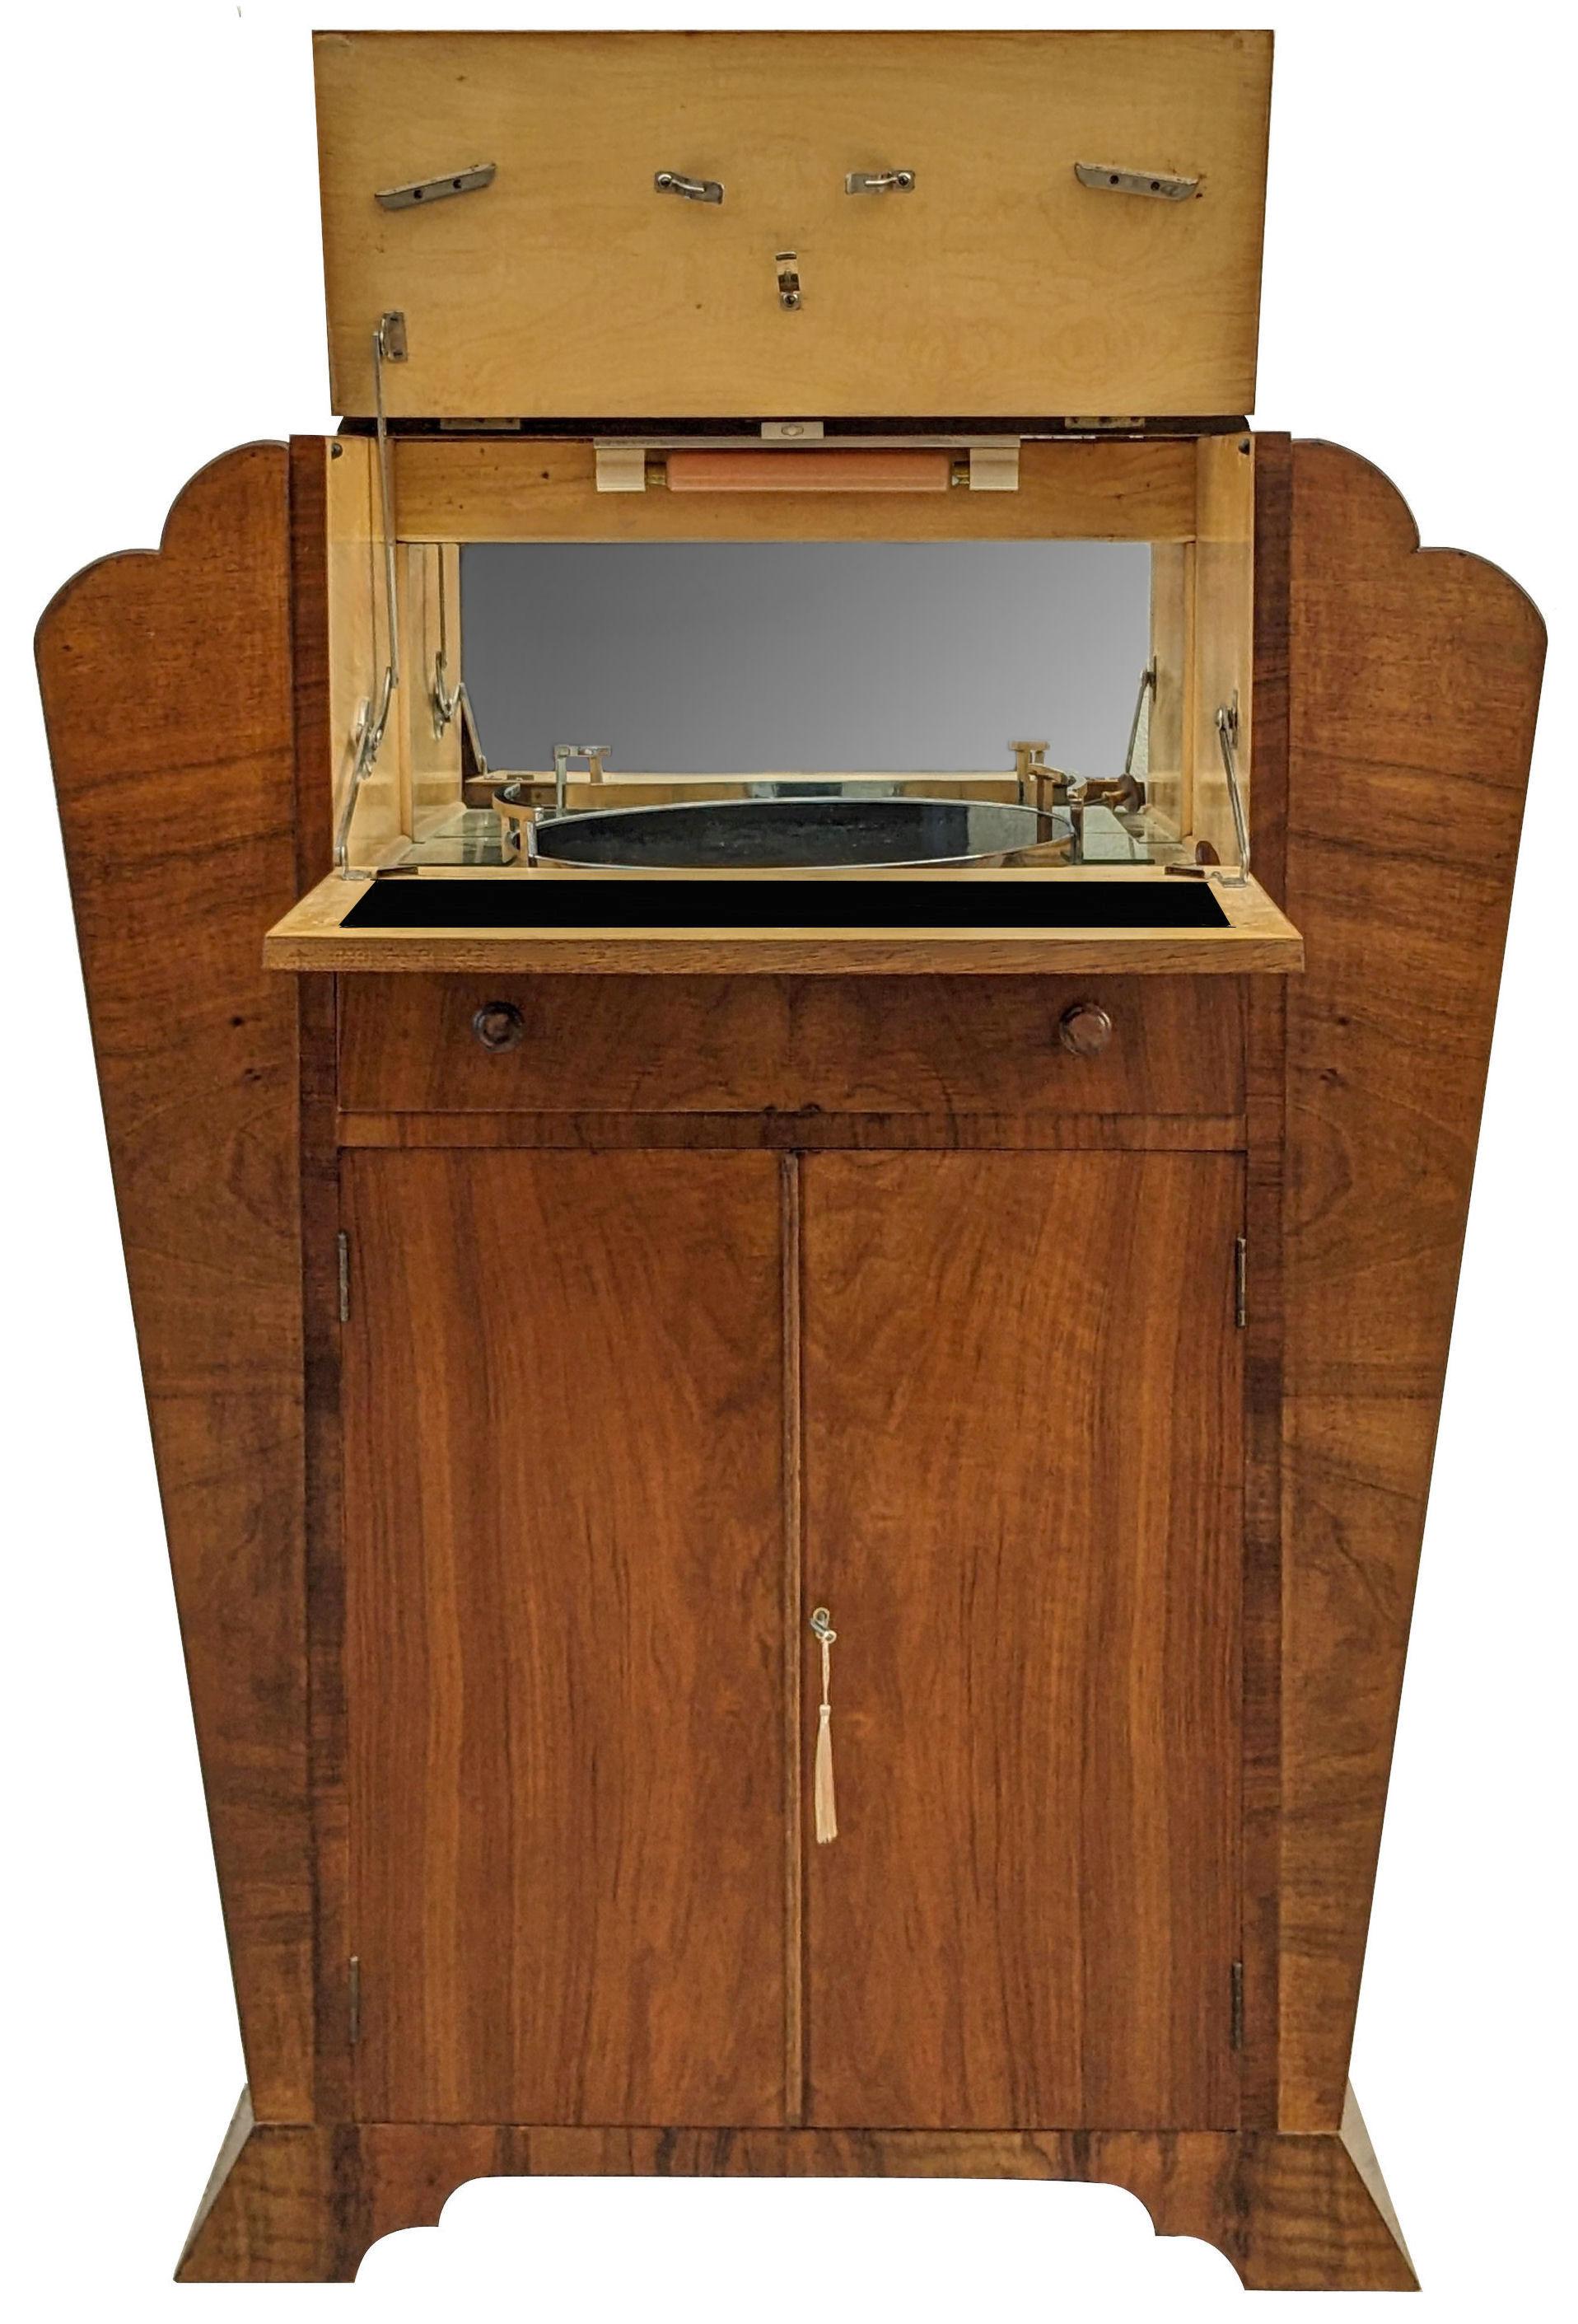 Art Deco Odeon Shaped Dry Bar Cocktail Cabinet, English, c1930 For Sale 2